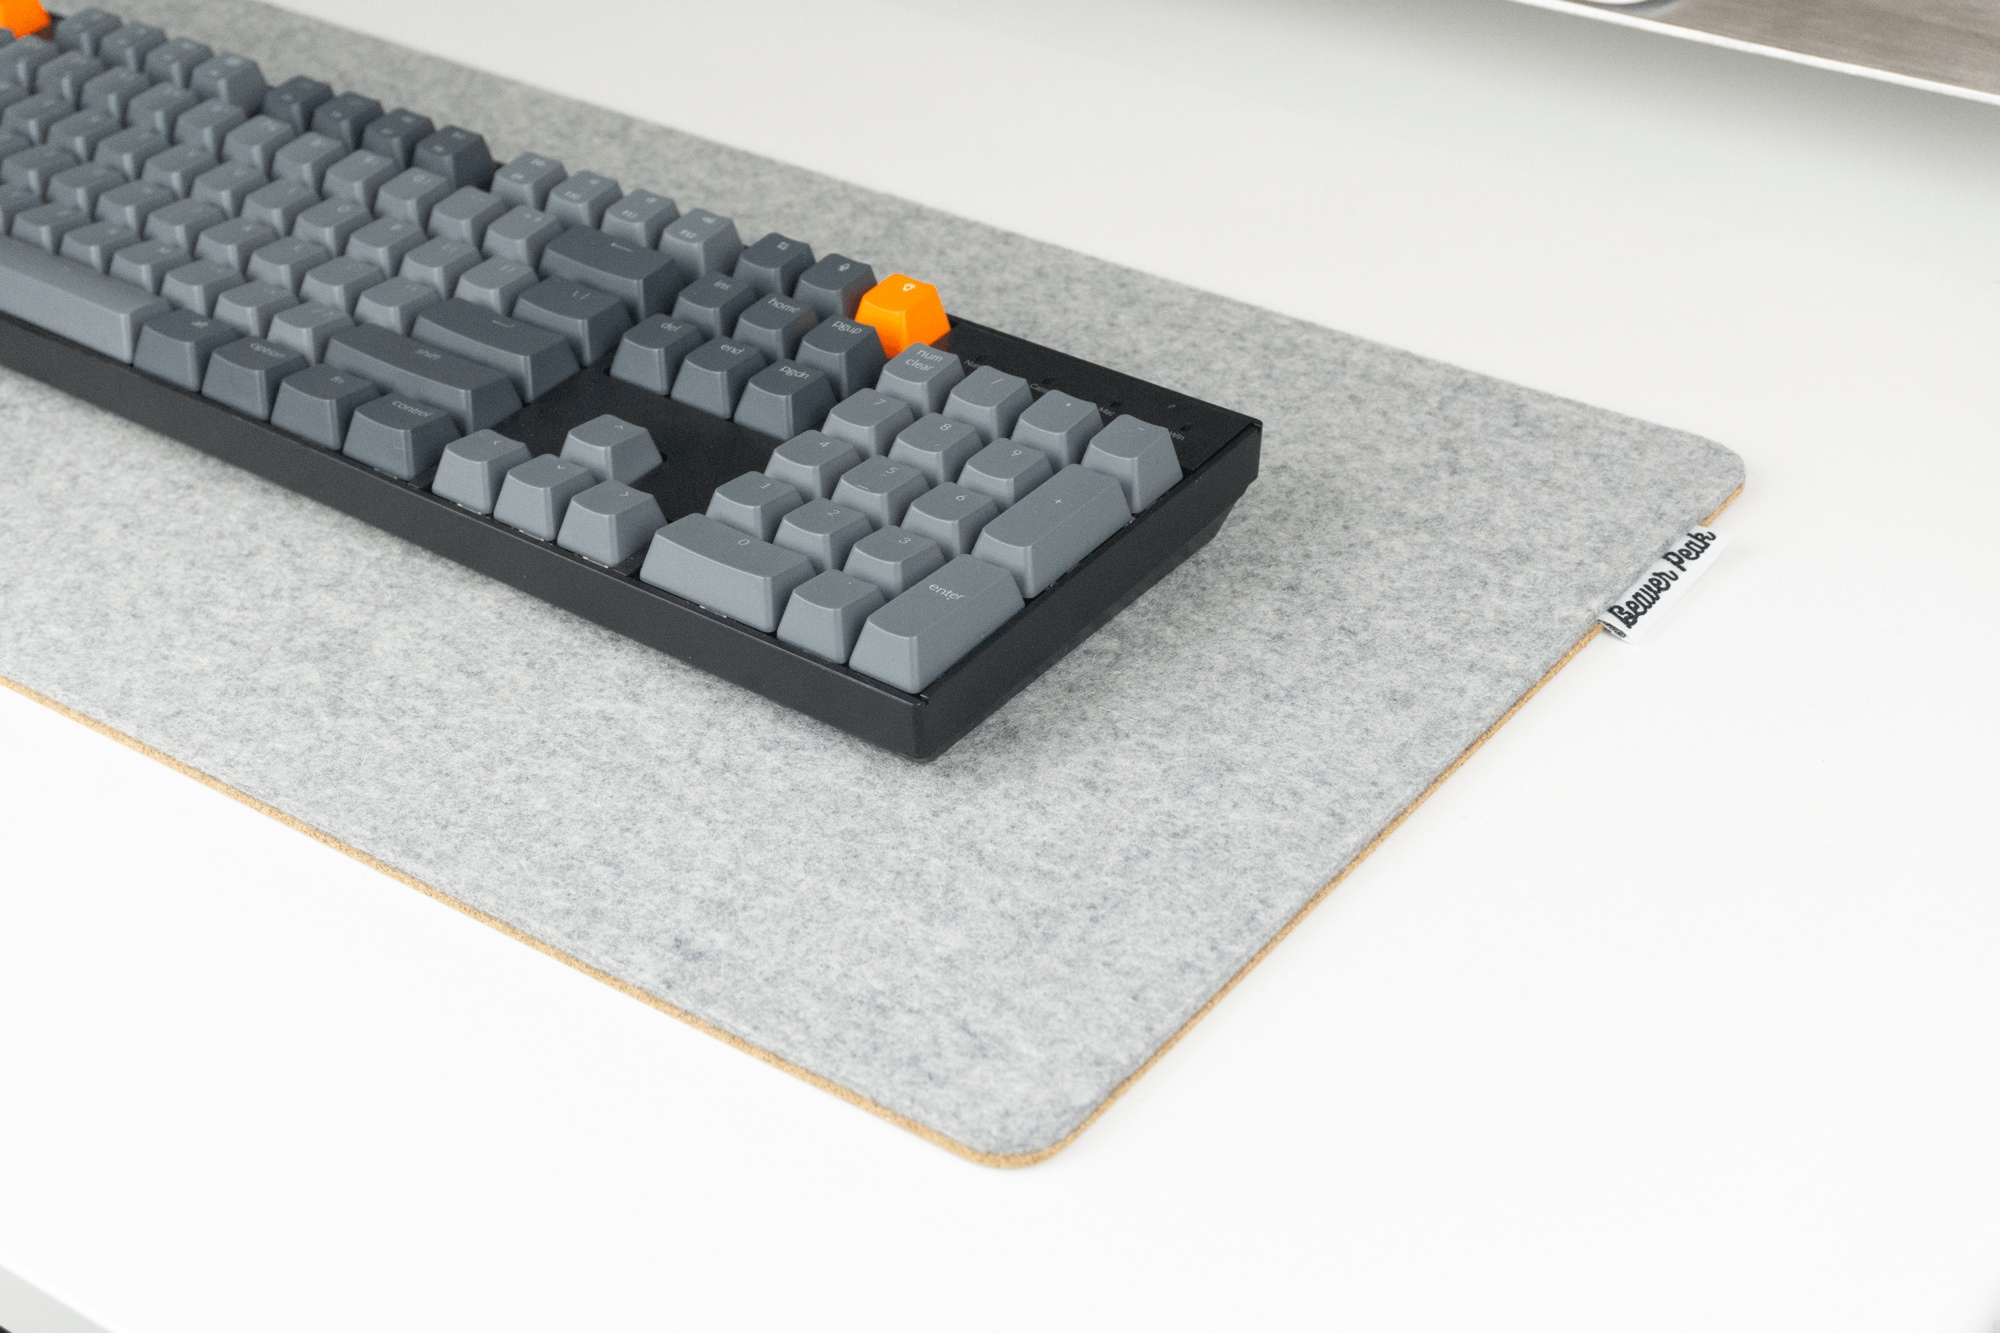 Grey wool and cork desk pad with mechanical keyboard on top